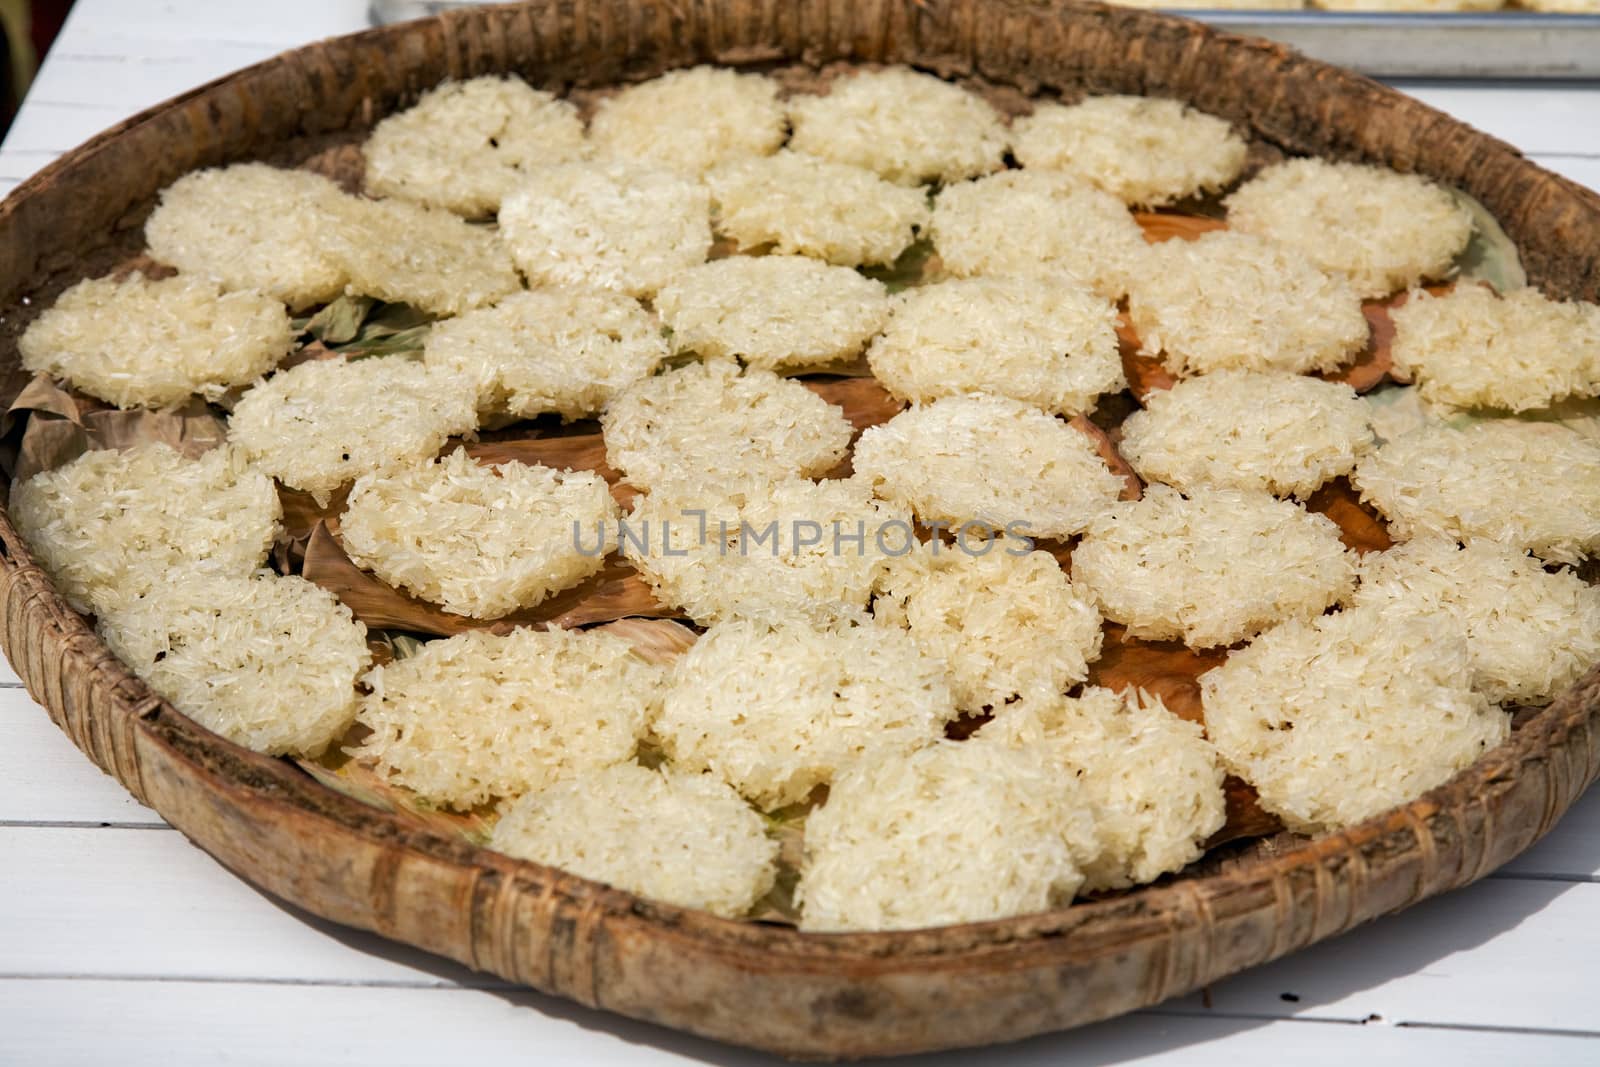 dried rice scone on twiggen plate  by foryouinf